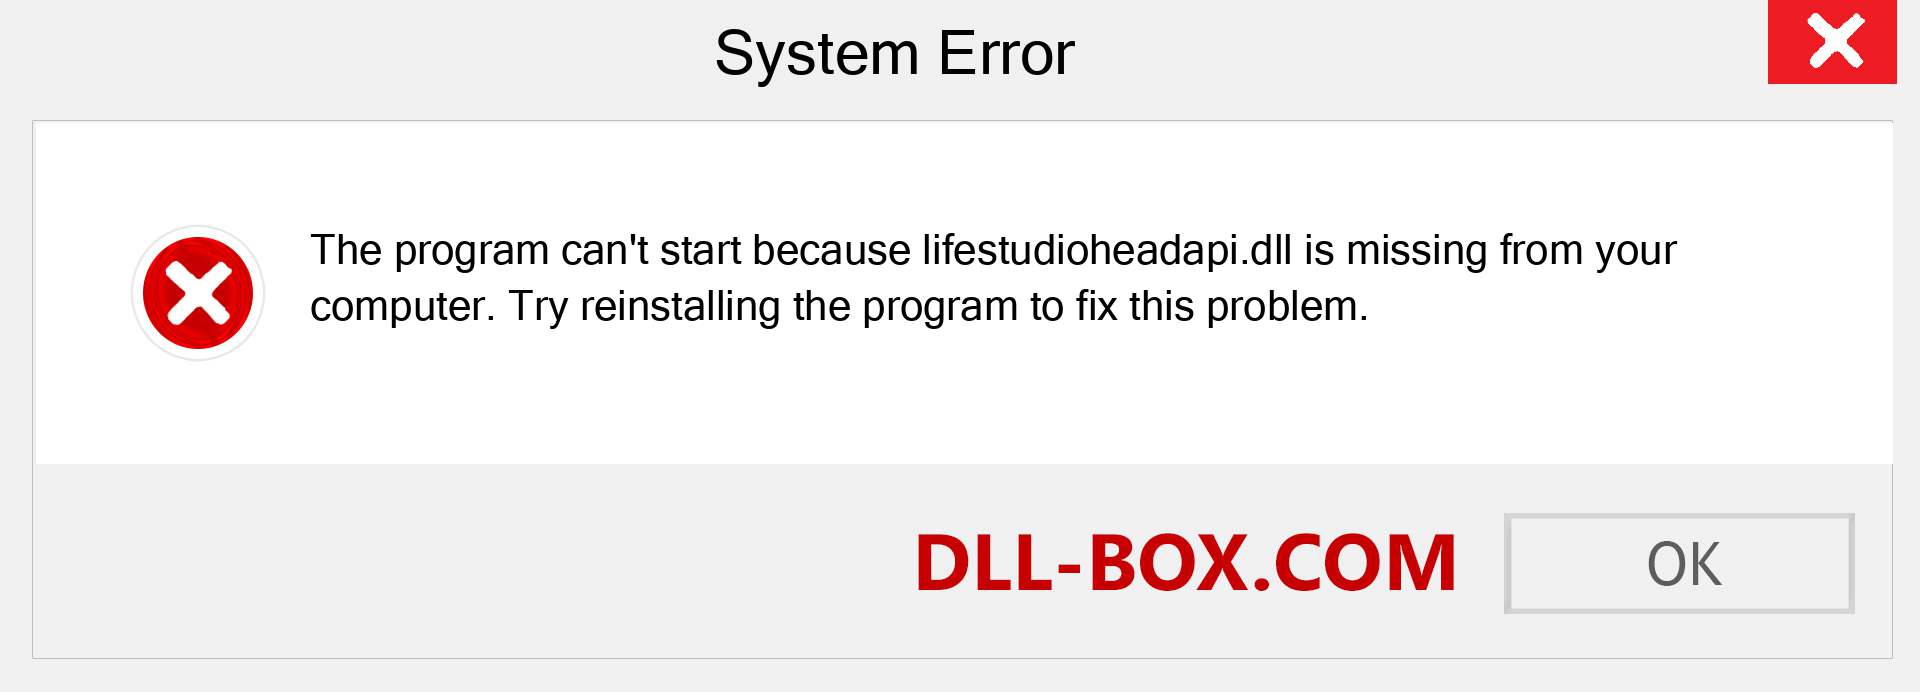  lifestudioheadapi.dll file is missing?. Download for Windows 7, 8, 10 - Fix  lifestudioheadapi dll Missing Error on Windows, photos, images